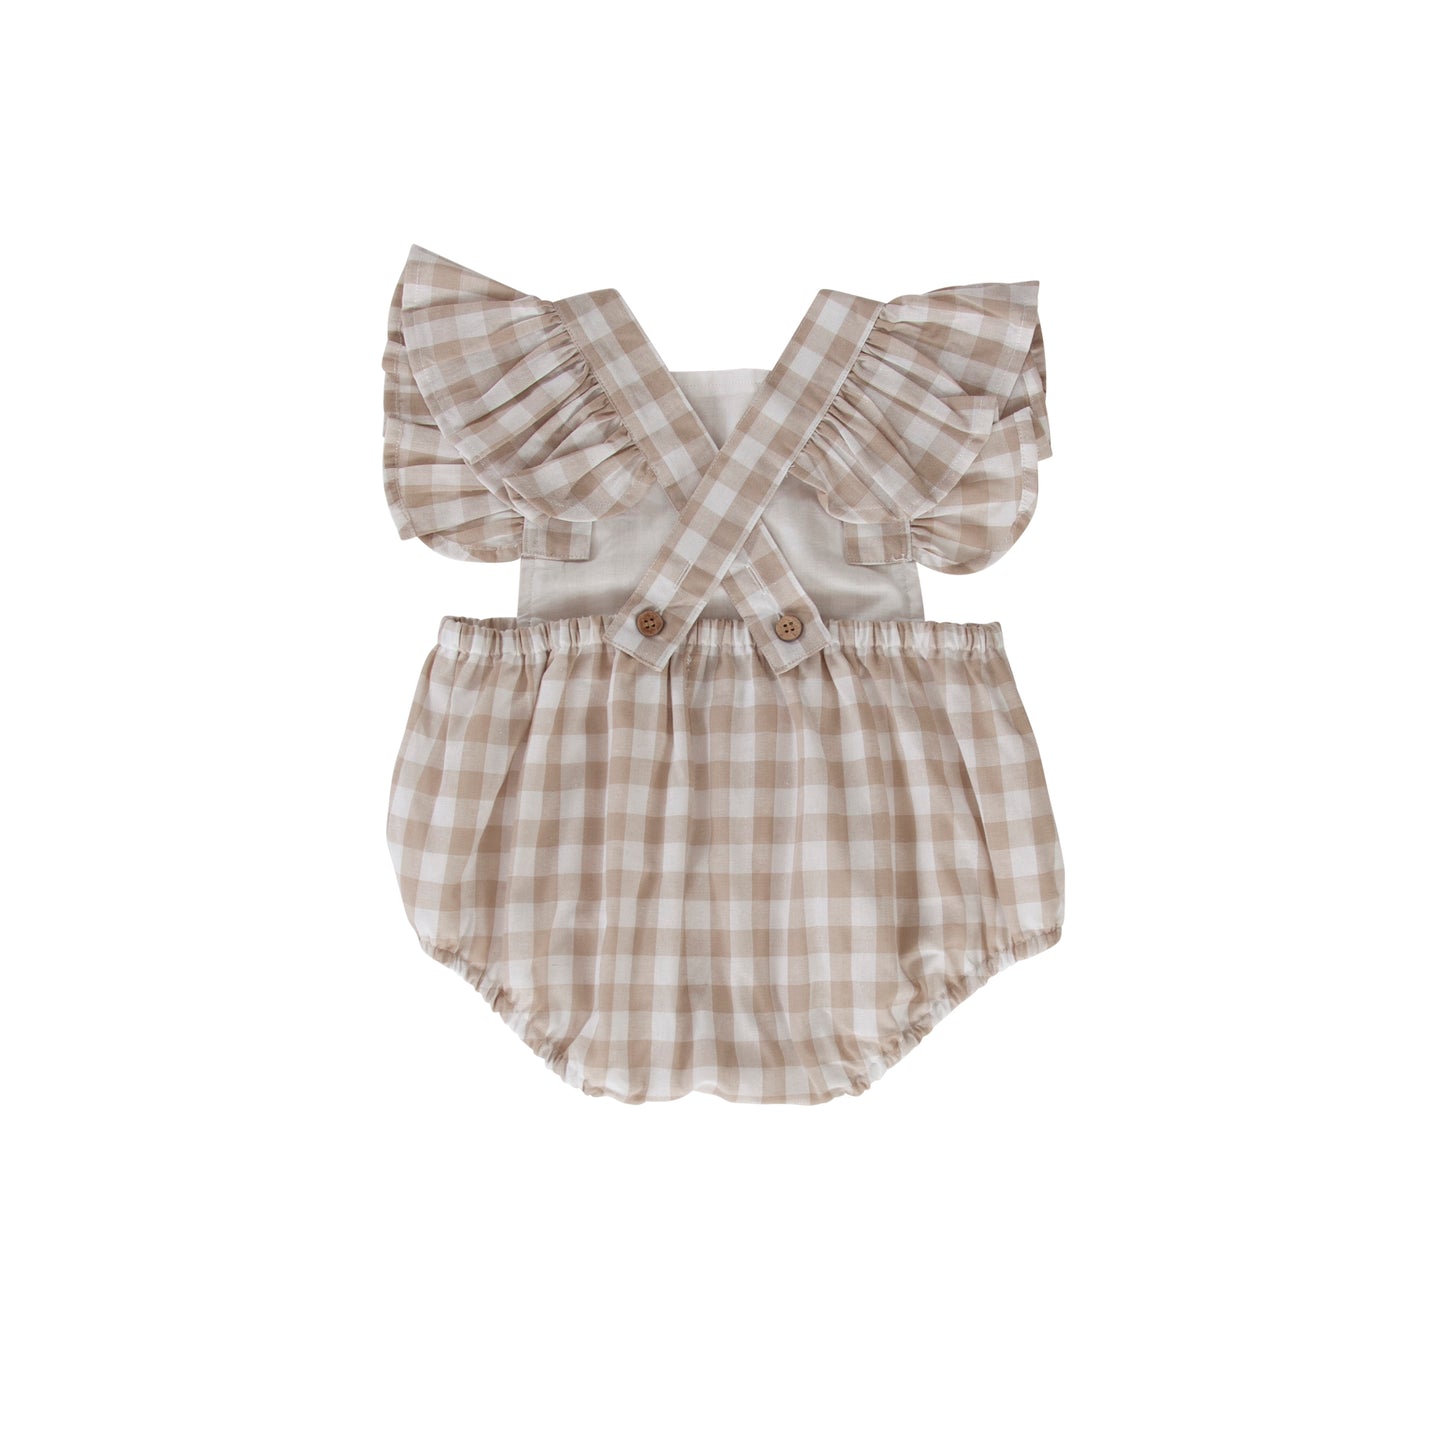 Ling Playsuit in Taupe Gingham